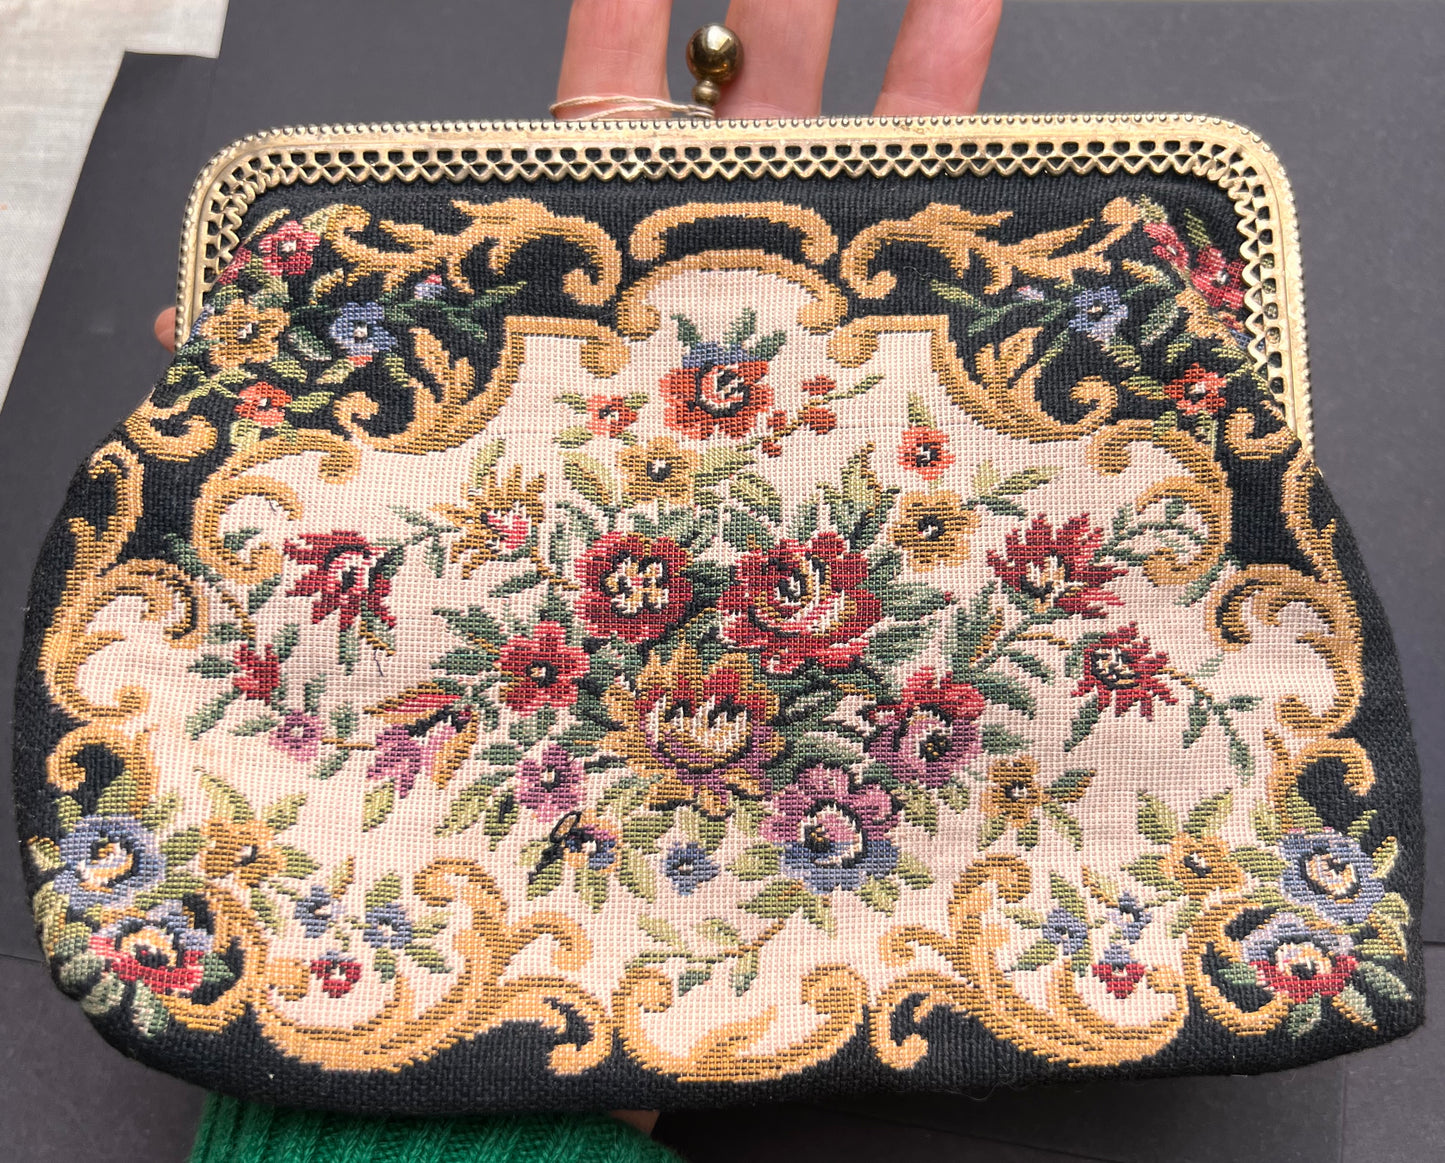 Never Used Vintage Fabric Clutch or Handbag (Missing Clip to Close it)